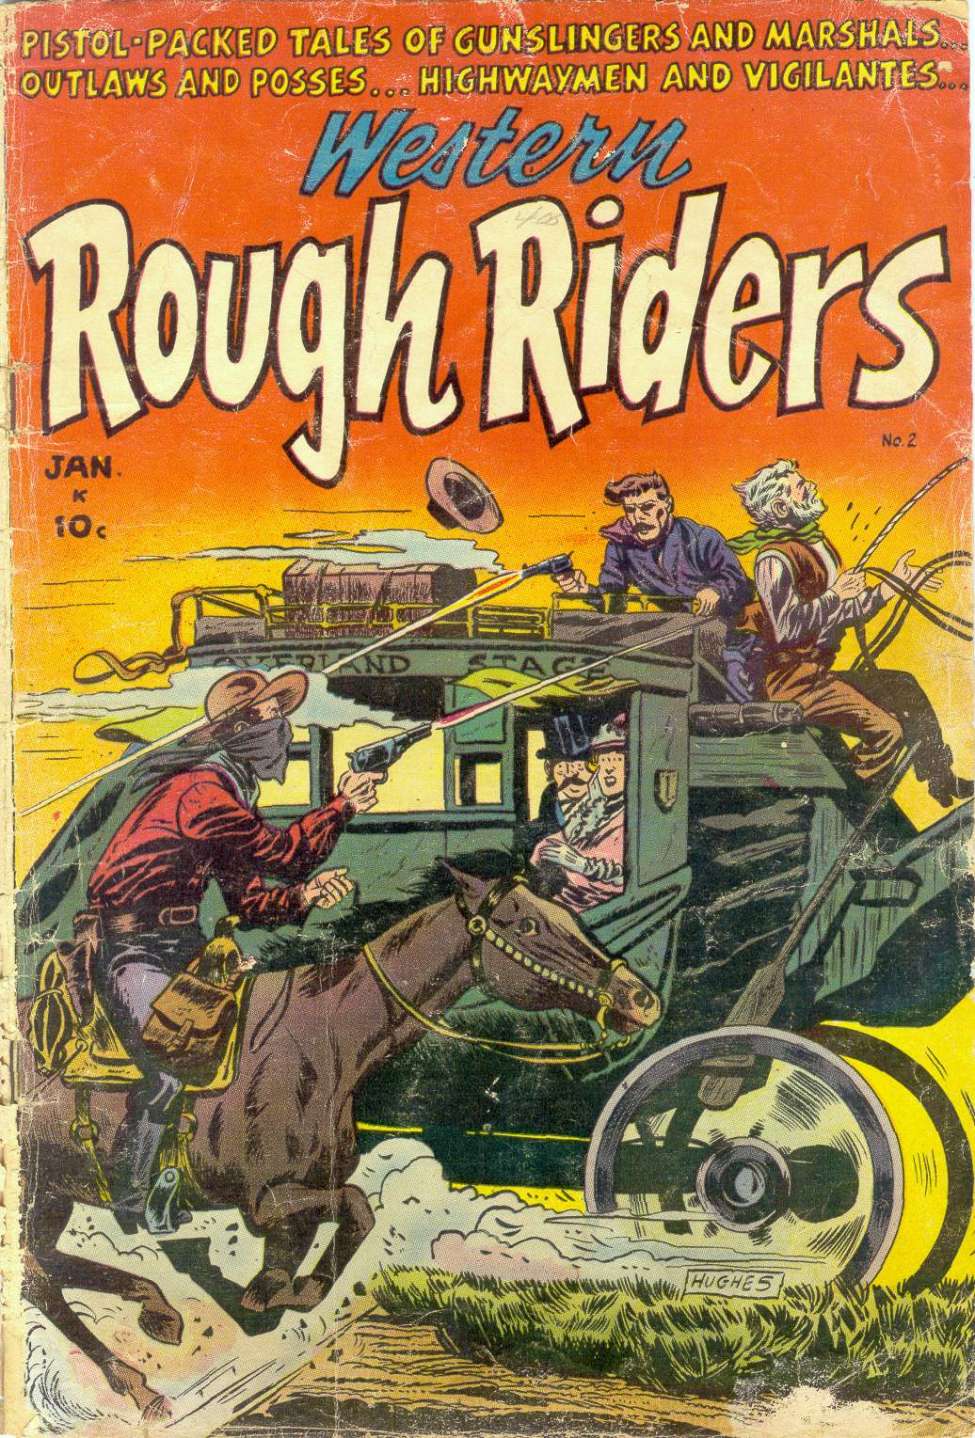 Book Cover For Western Rough Riders 2